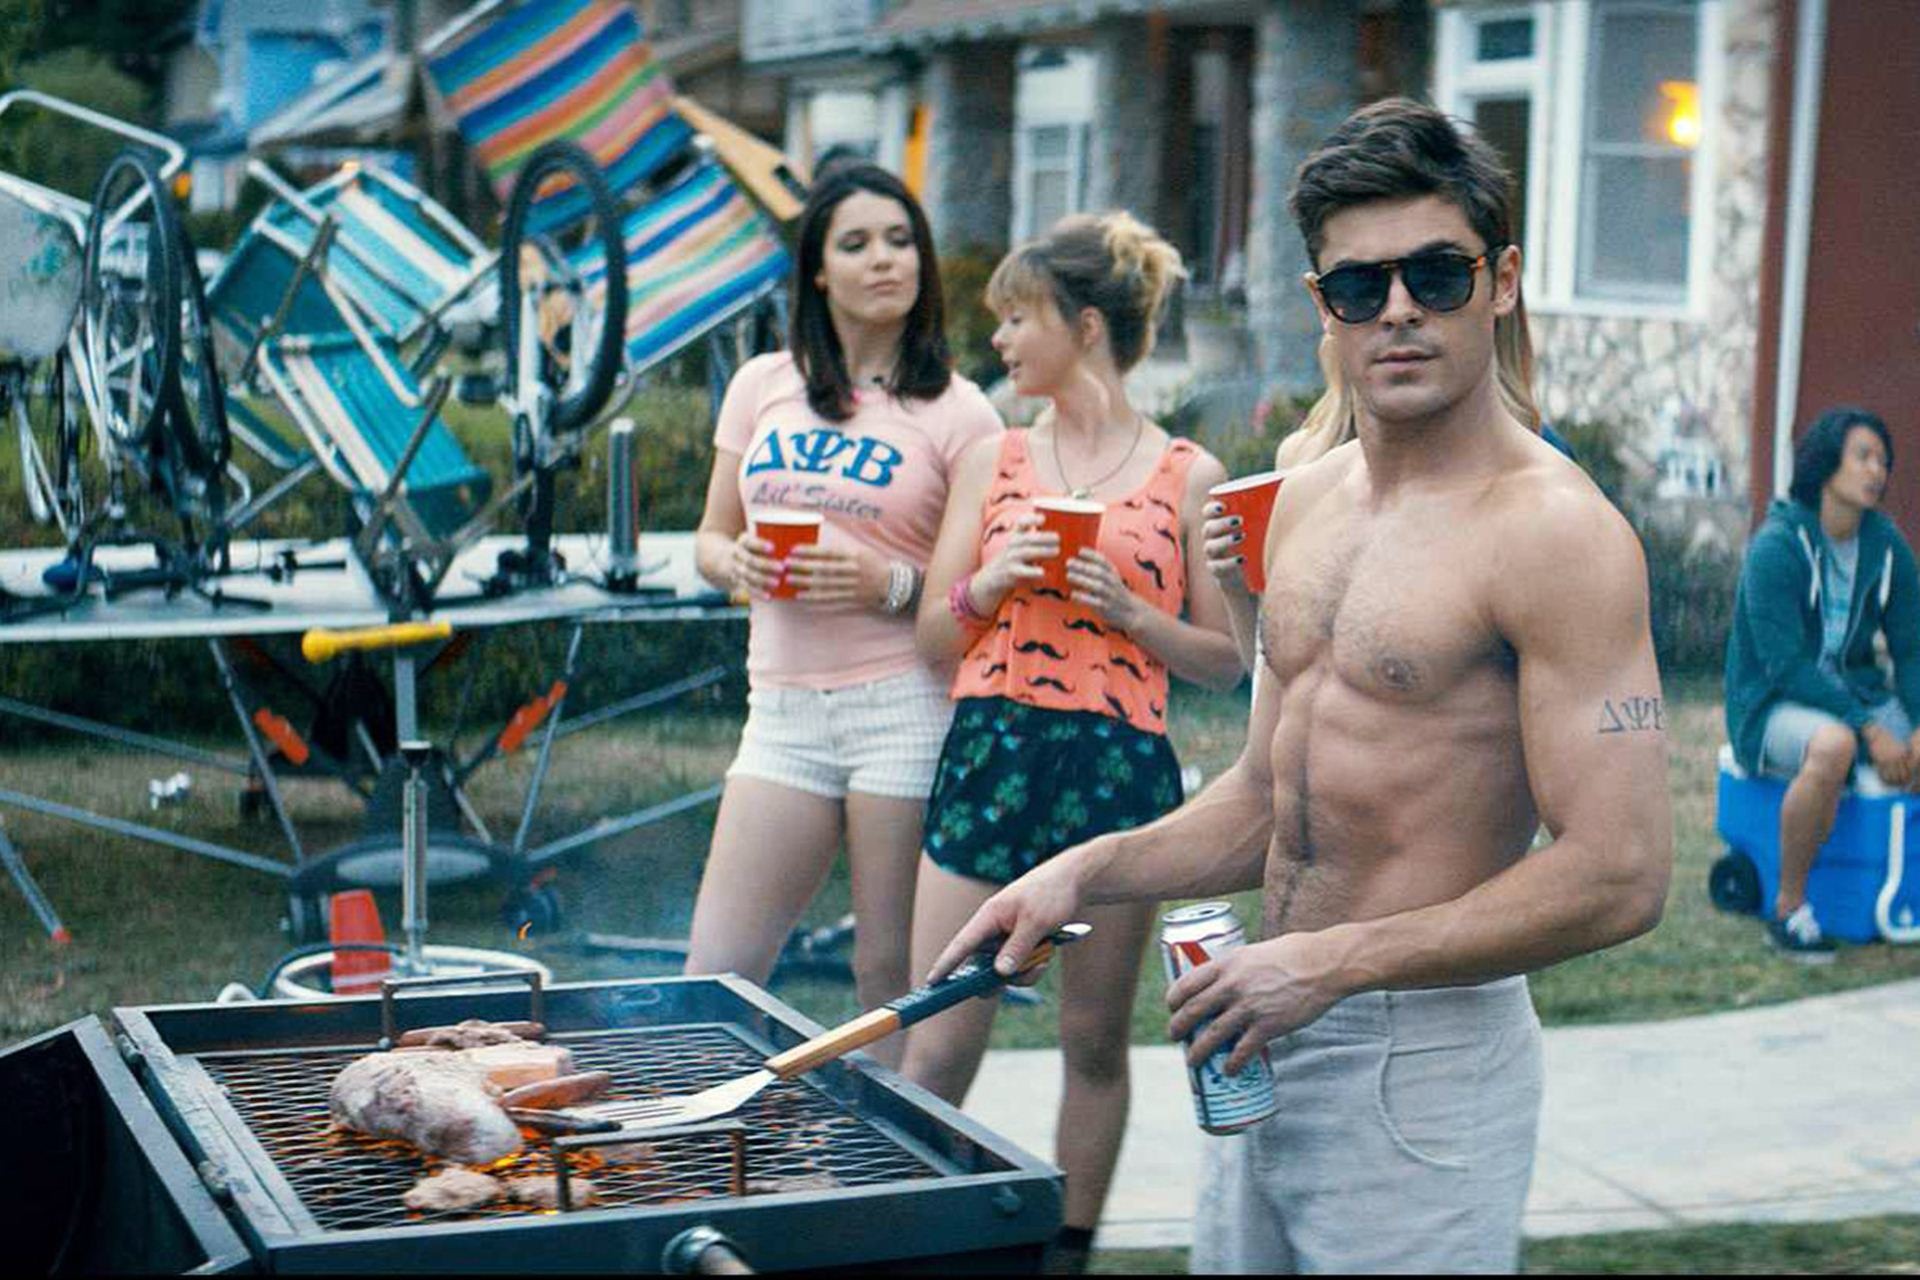 Bad Neighbours 2014, directed by Nicholas Stoller